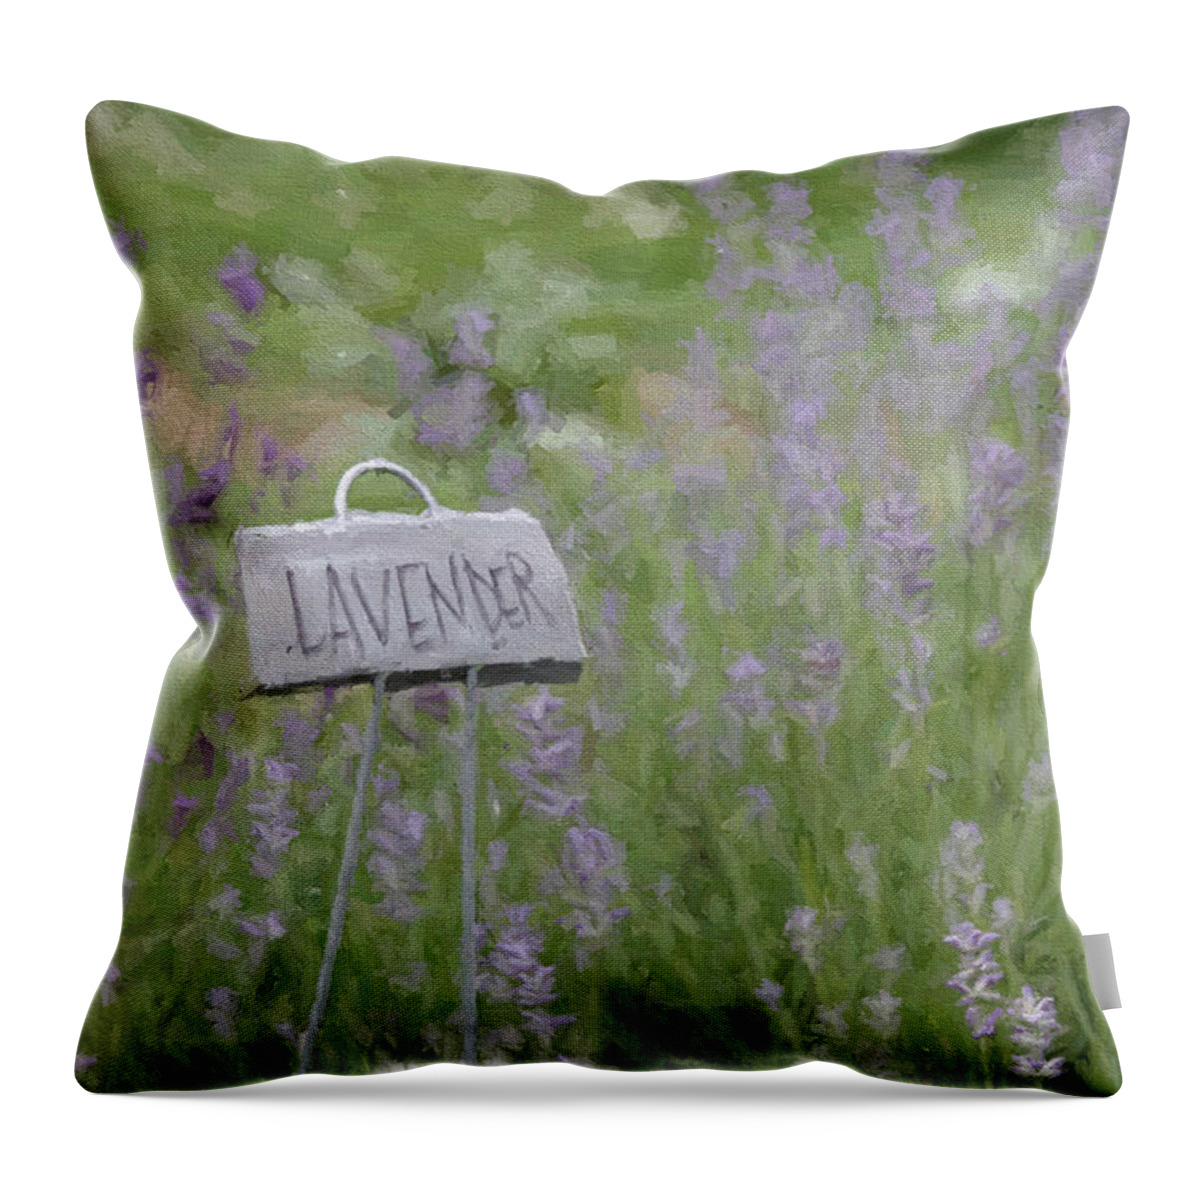 Lavender Throw Pillow featuring the digital art Lavender by Jayne Carney